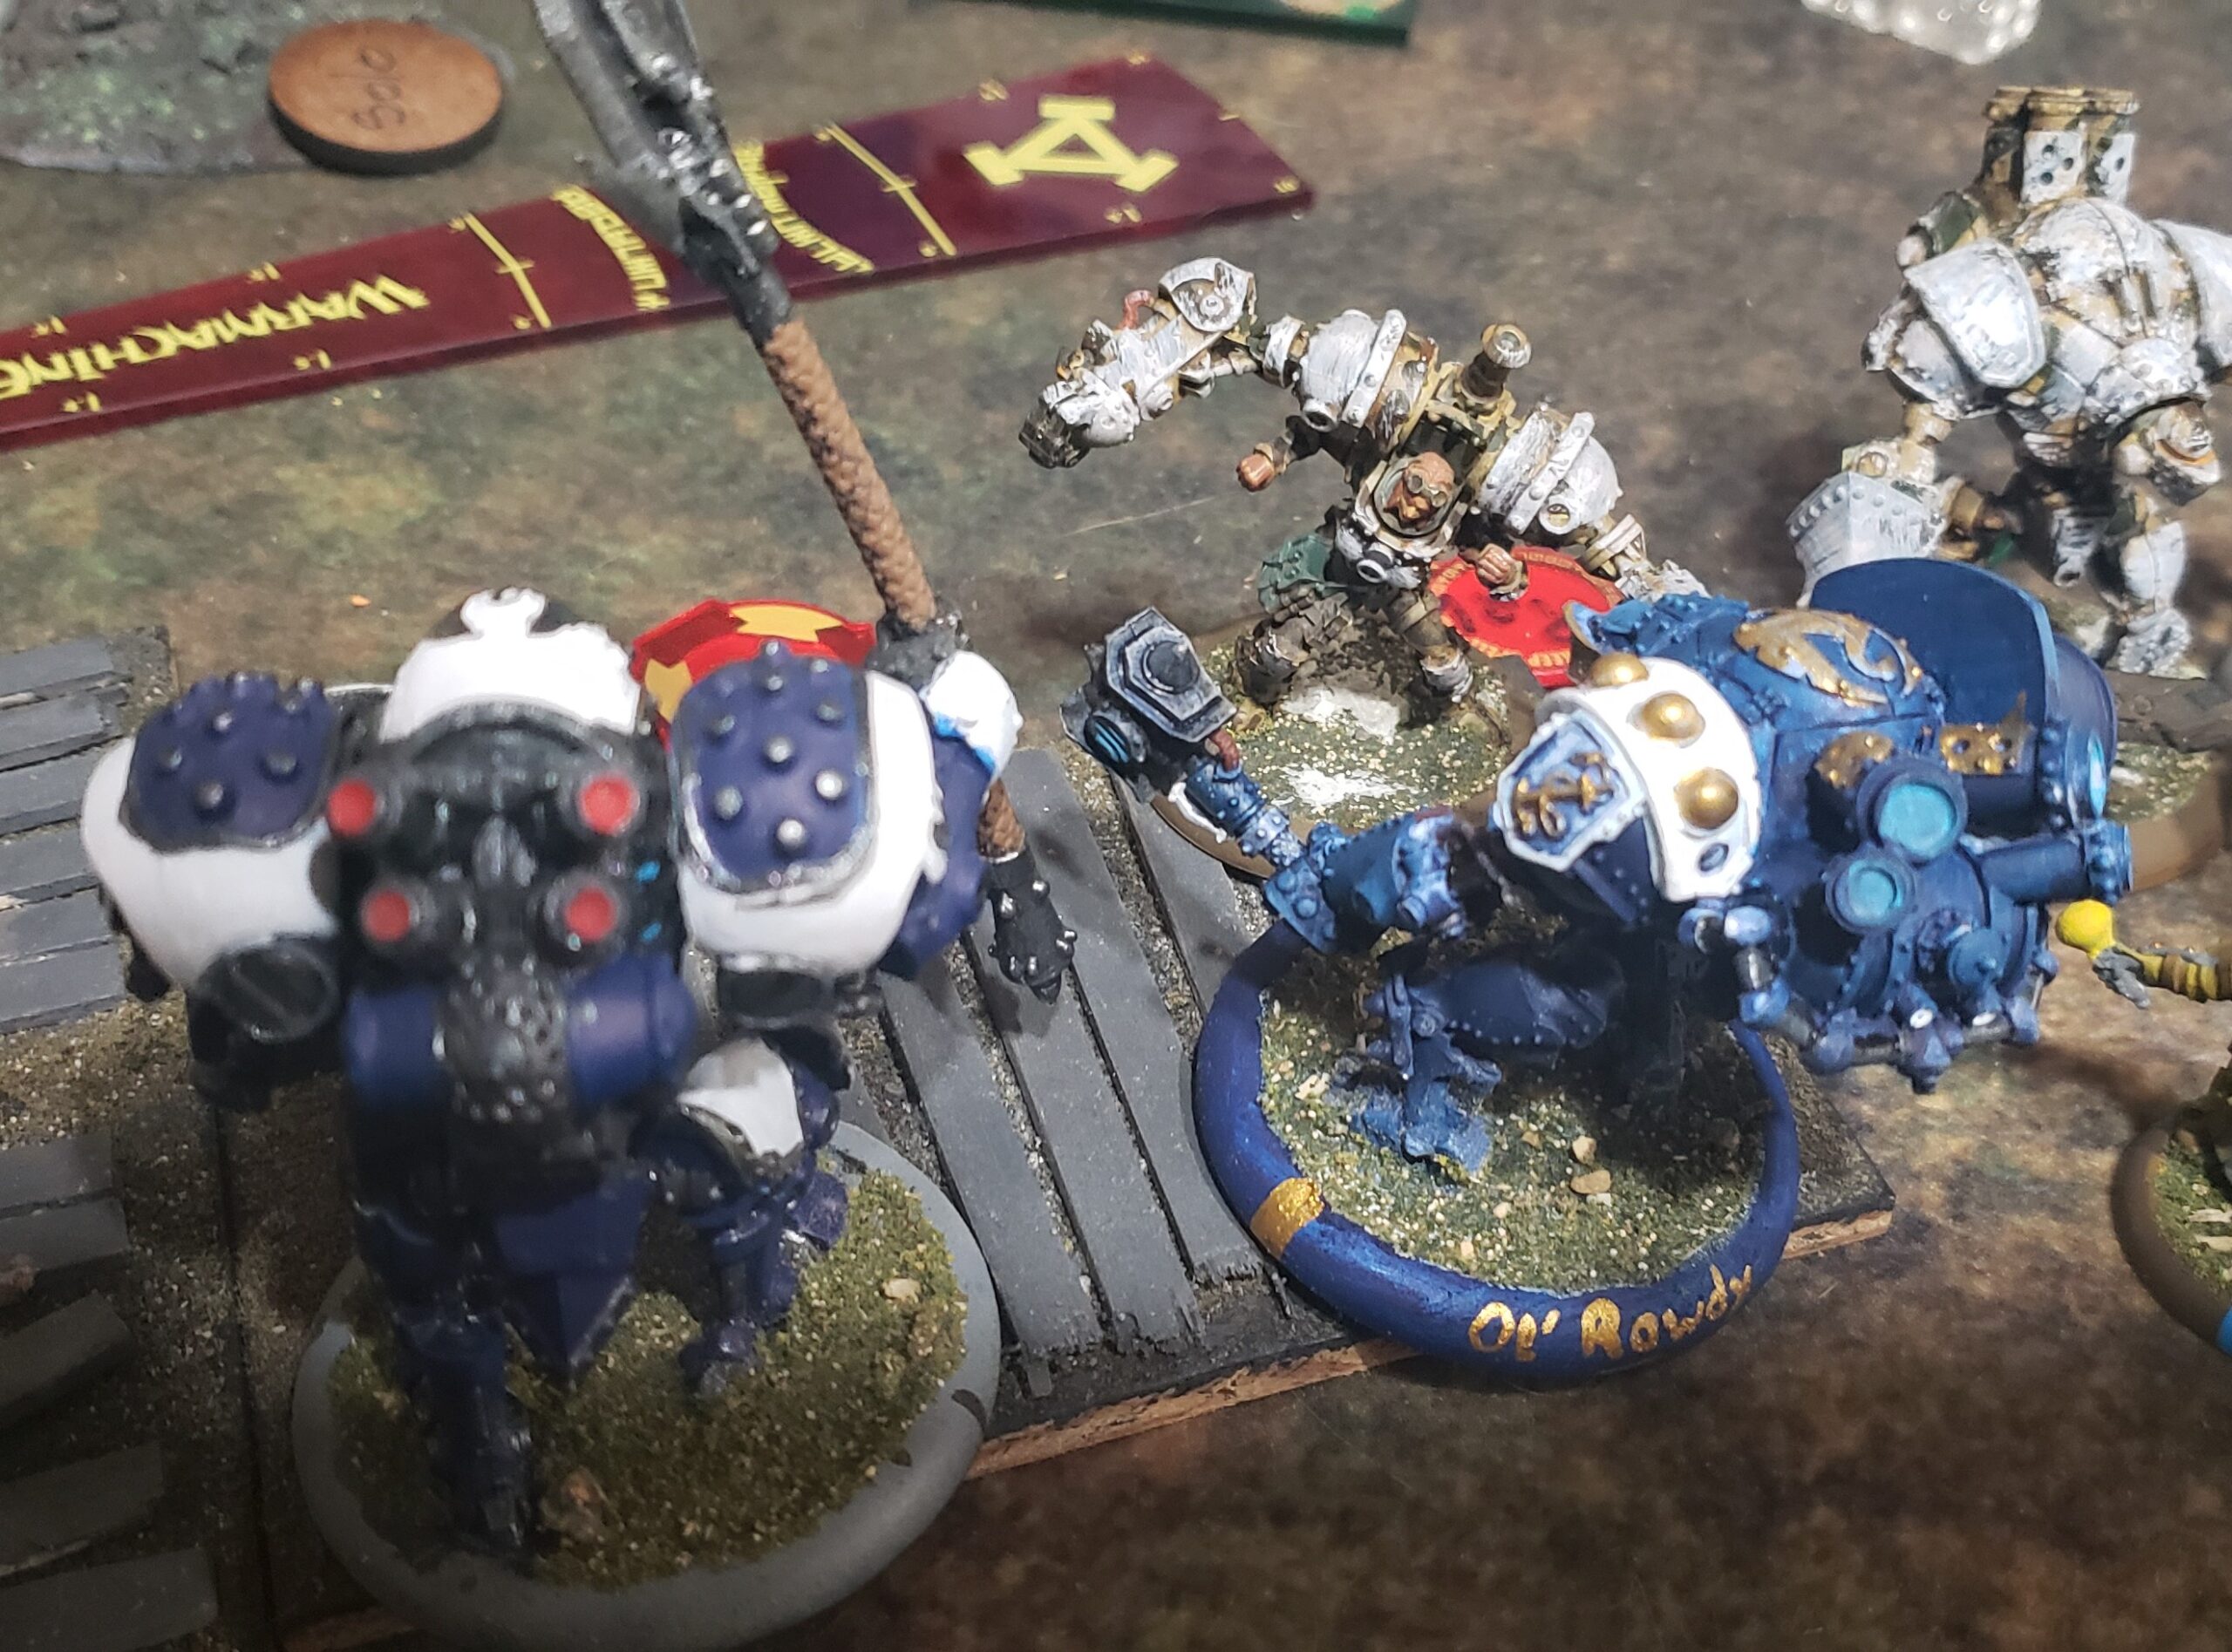 Stryker 1  Sons of the Tempest vs Locke 1 Prima Materia, 75 points